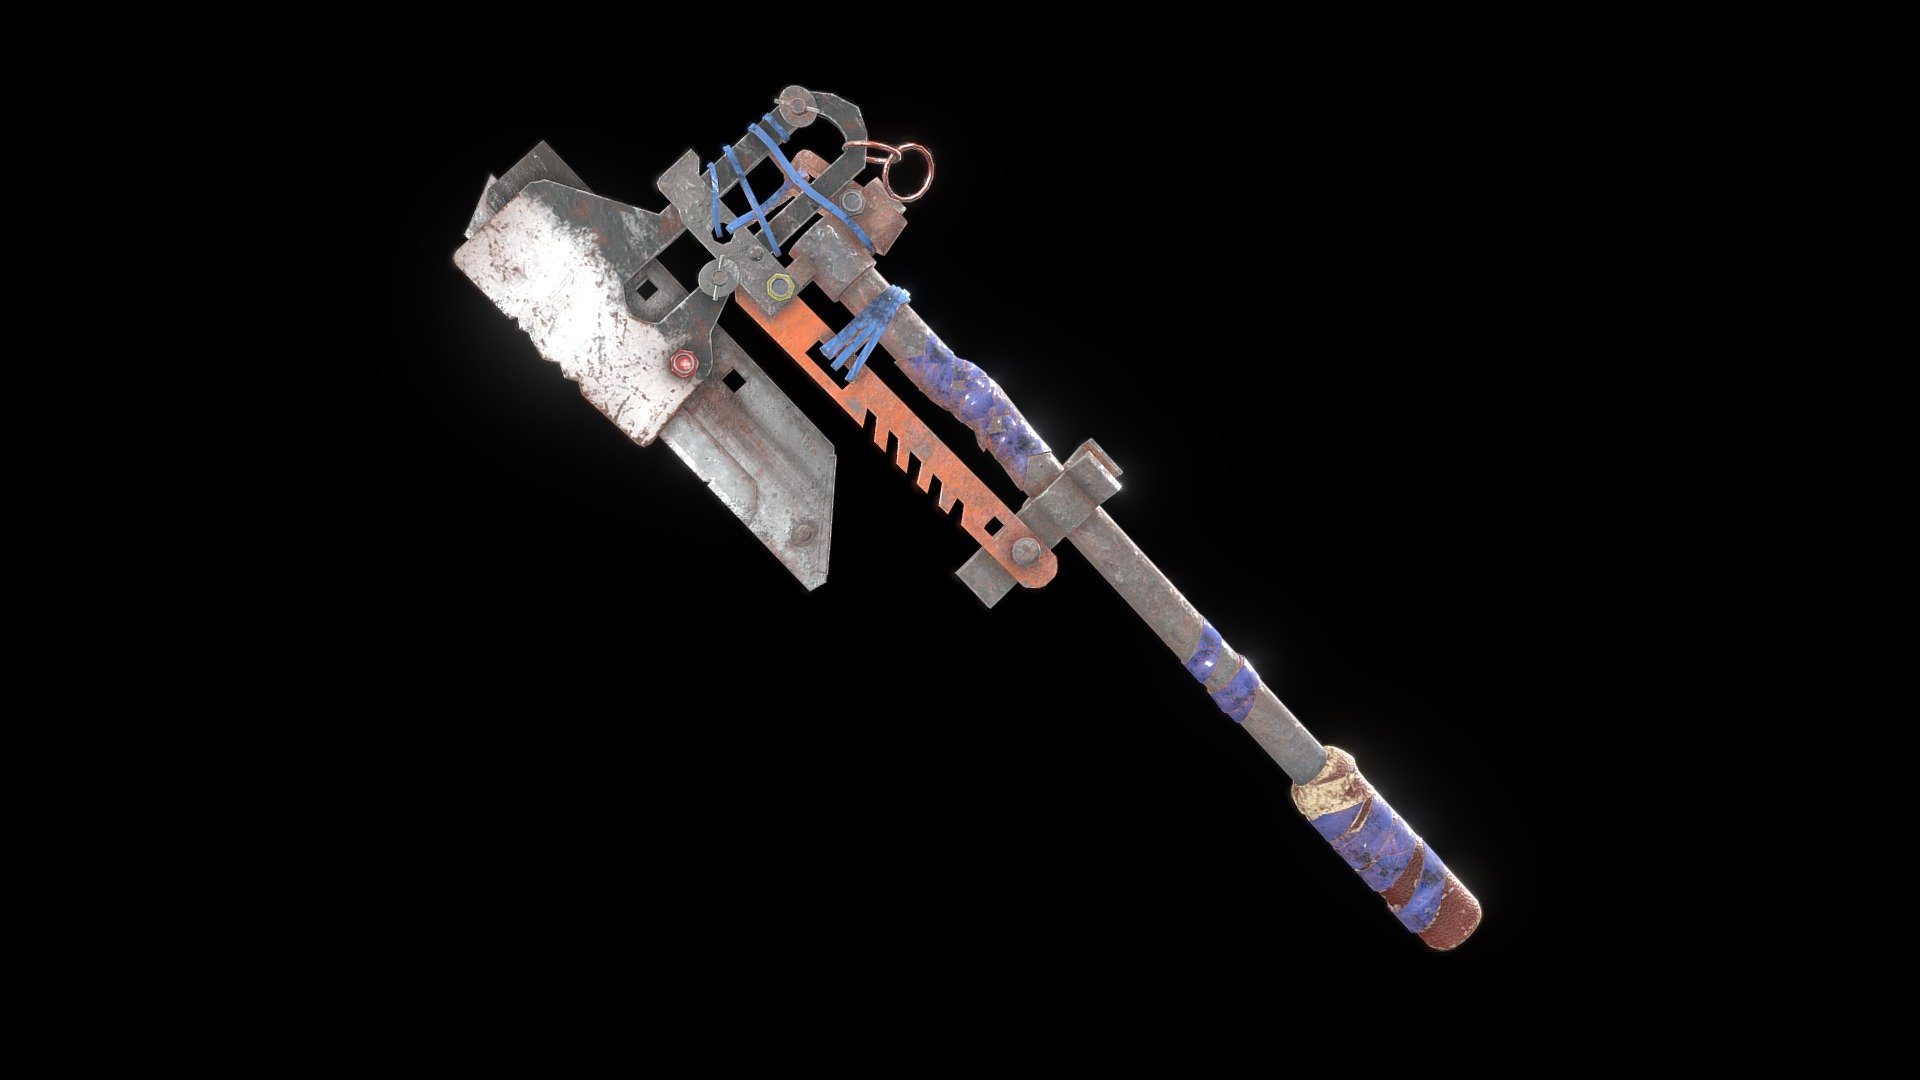 **Post Apocalyptic Axe Weapon
**

This is a Post Apocalyptic Axe to cover all your game ready needs. It is made with scraps and waste to make it more of a makeshift look. It is created with water pipes, duct tape, wires, saw, and metal scrap. Hope you guys like it.

The File Includes:-
* Axe Model (Base Mesh)
* Albedo Map
* Height Map
* Metalic Map
* Normal Map
* Roughness Map

For 8K Textures, Contact me on Instagram Click HERE
PLEASE TAG OR MENTION THE CREATOR UPON USE OF THE ASSET - Post Apocalyptic Makeshift Axe Weapon - Download Free 3D model by UmangRank 3d model